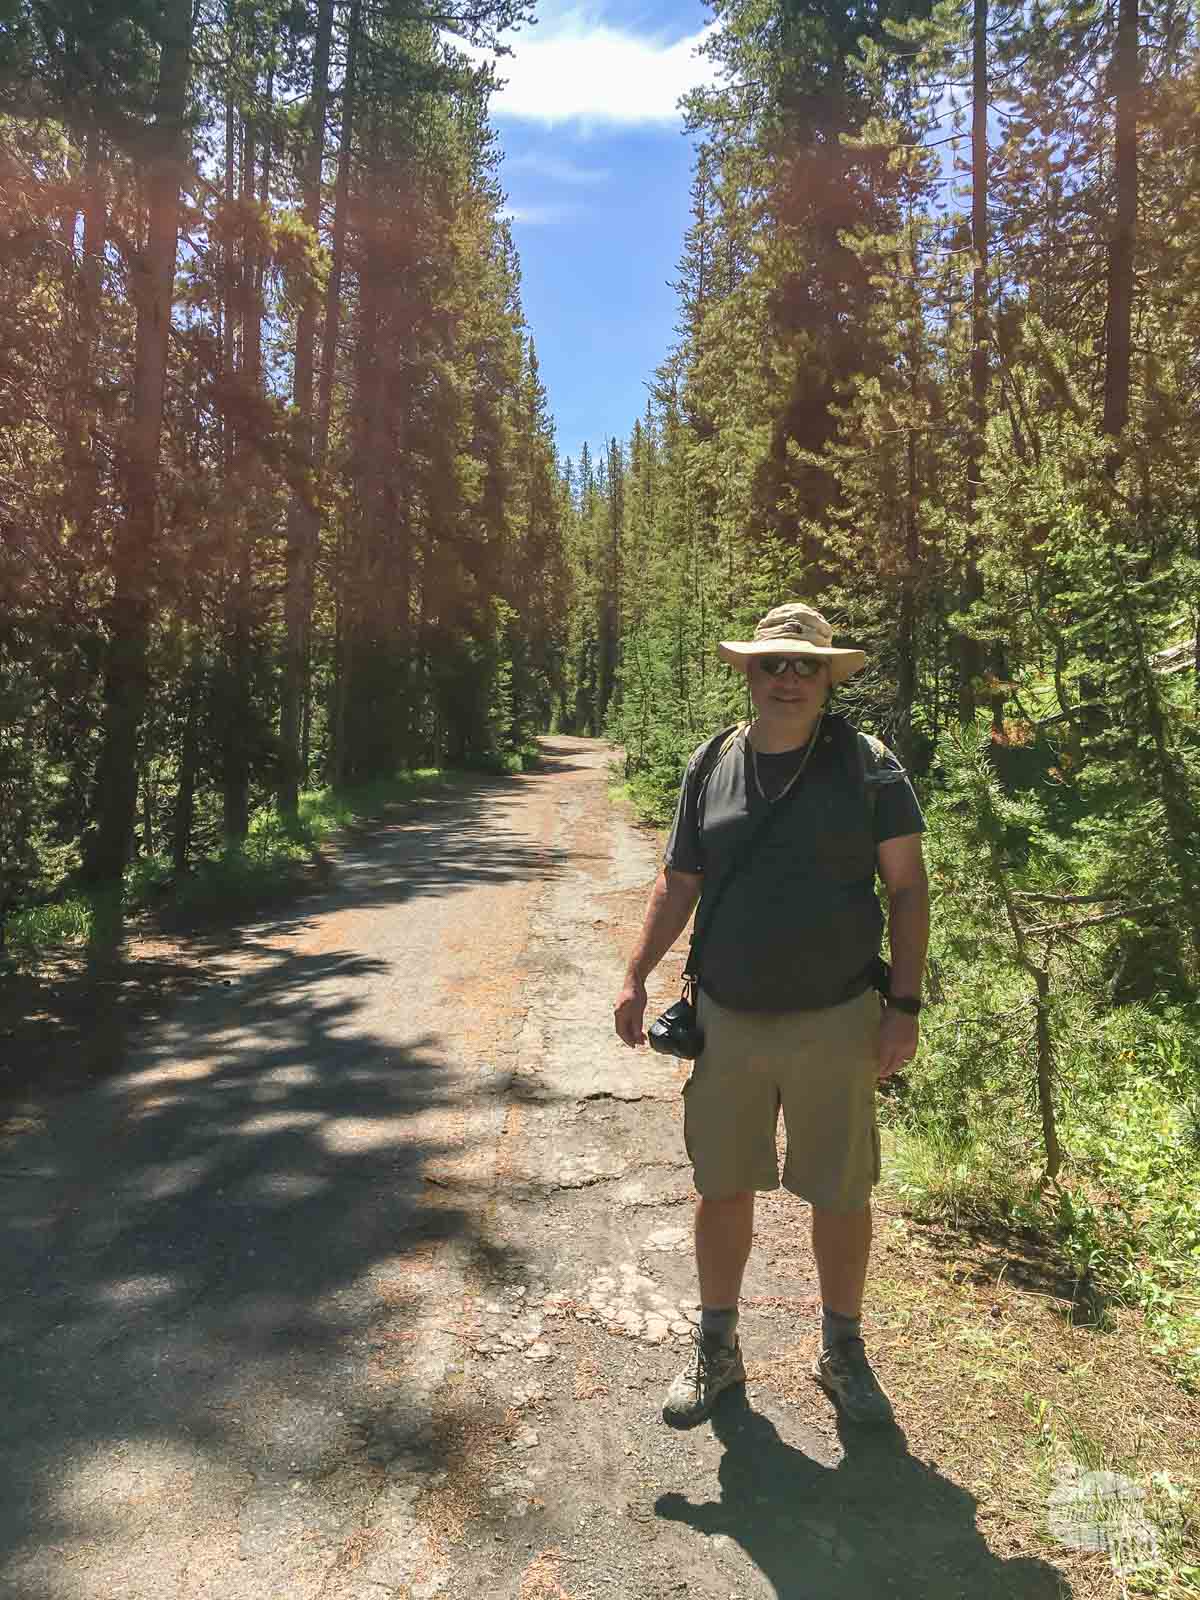 Hiking the Lonestar Geyser Trail in Yellowstone National Park